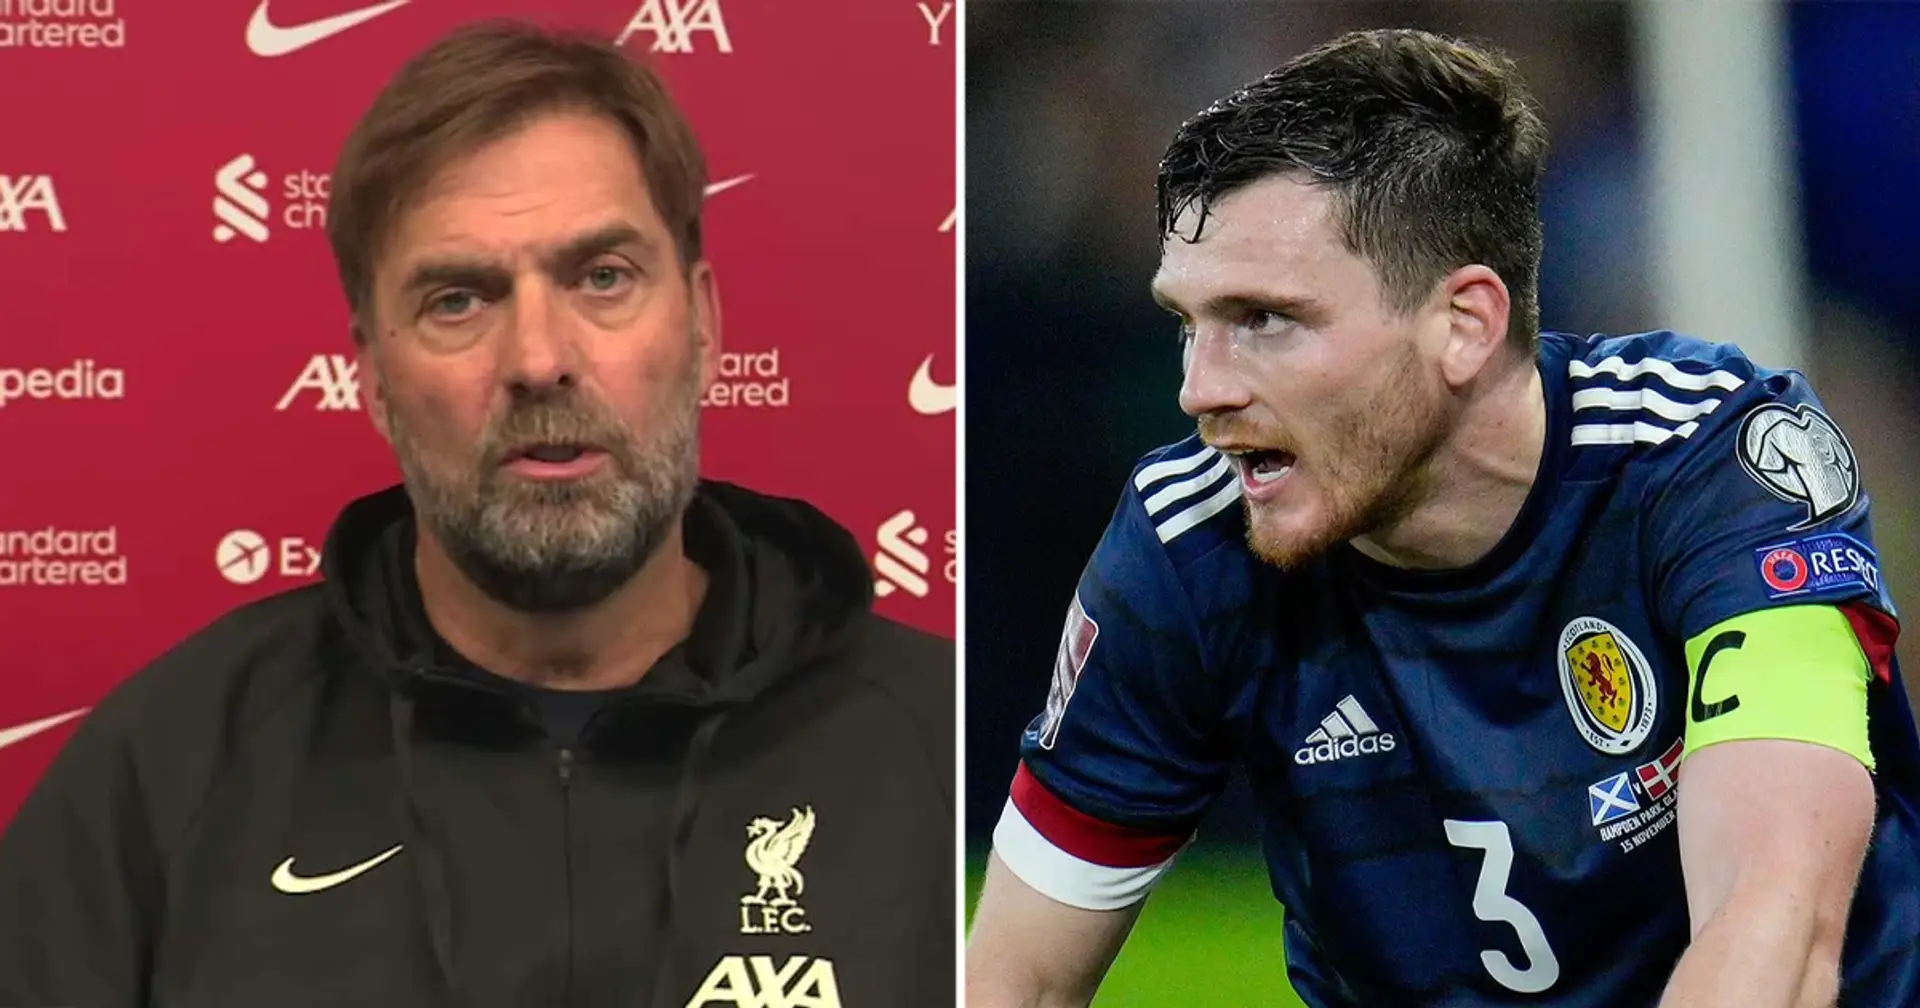 Jurgen Klopp provides fitness update on Andy Robertson and 3 more Liverpool players ahead of Arsenal game